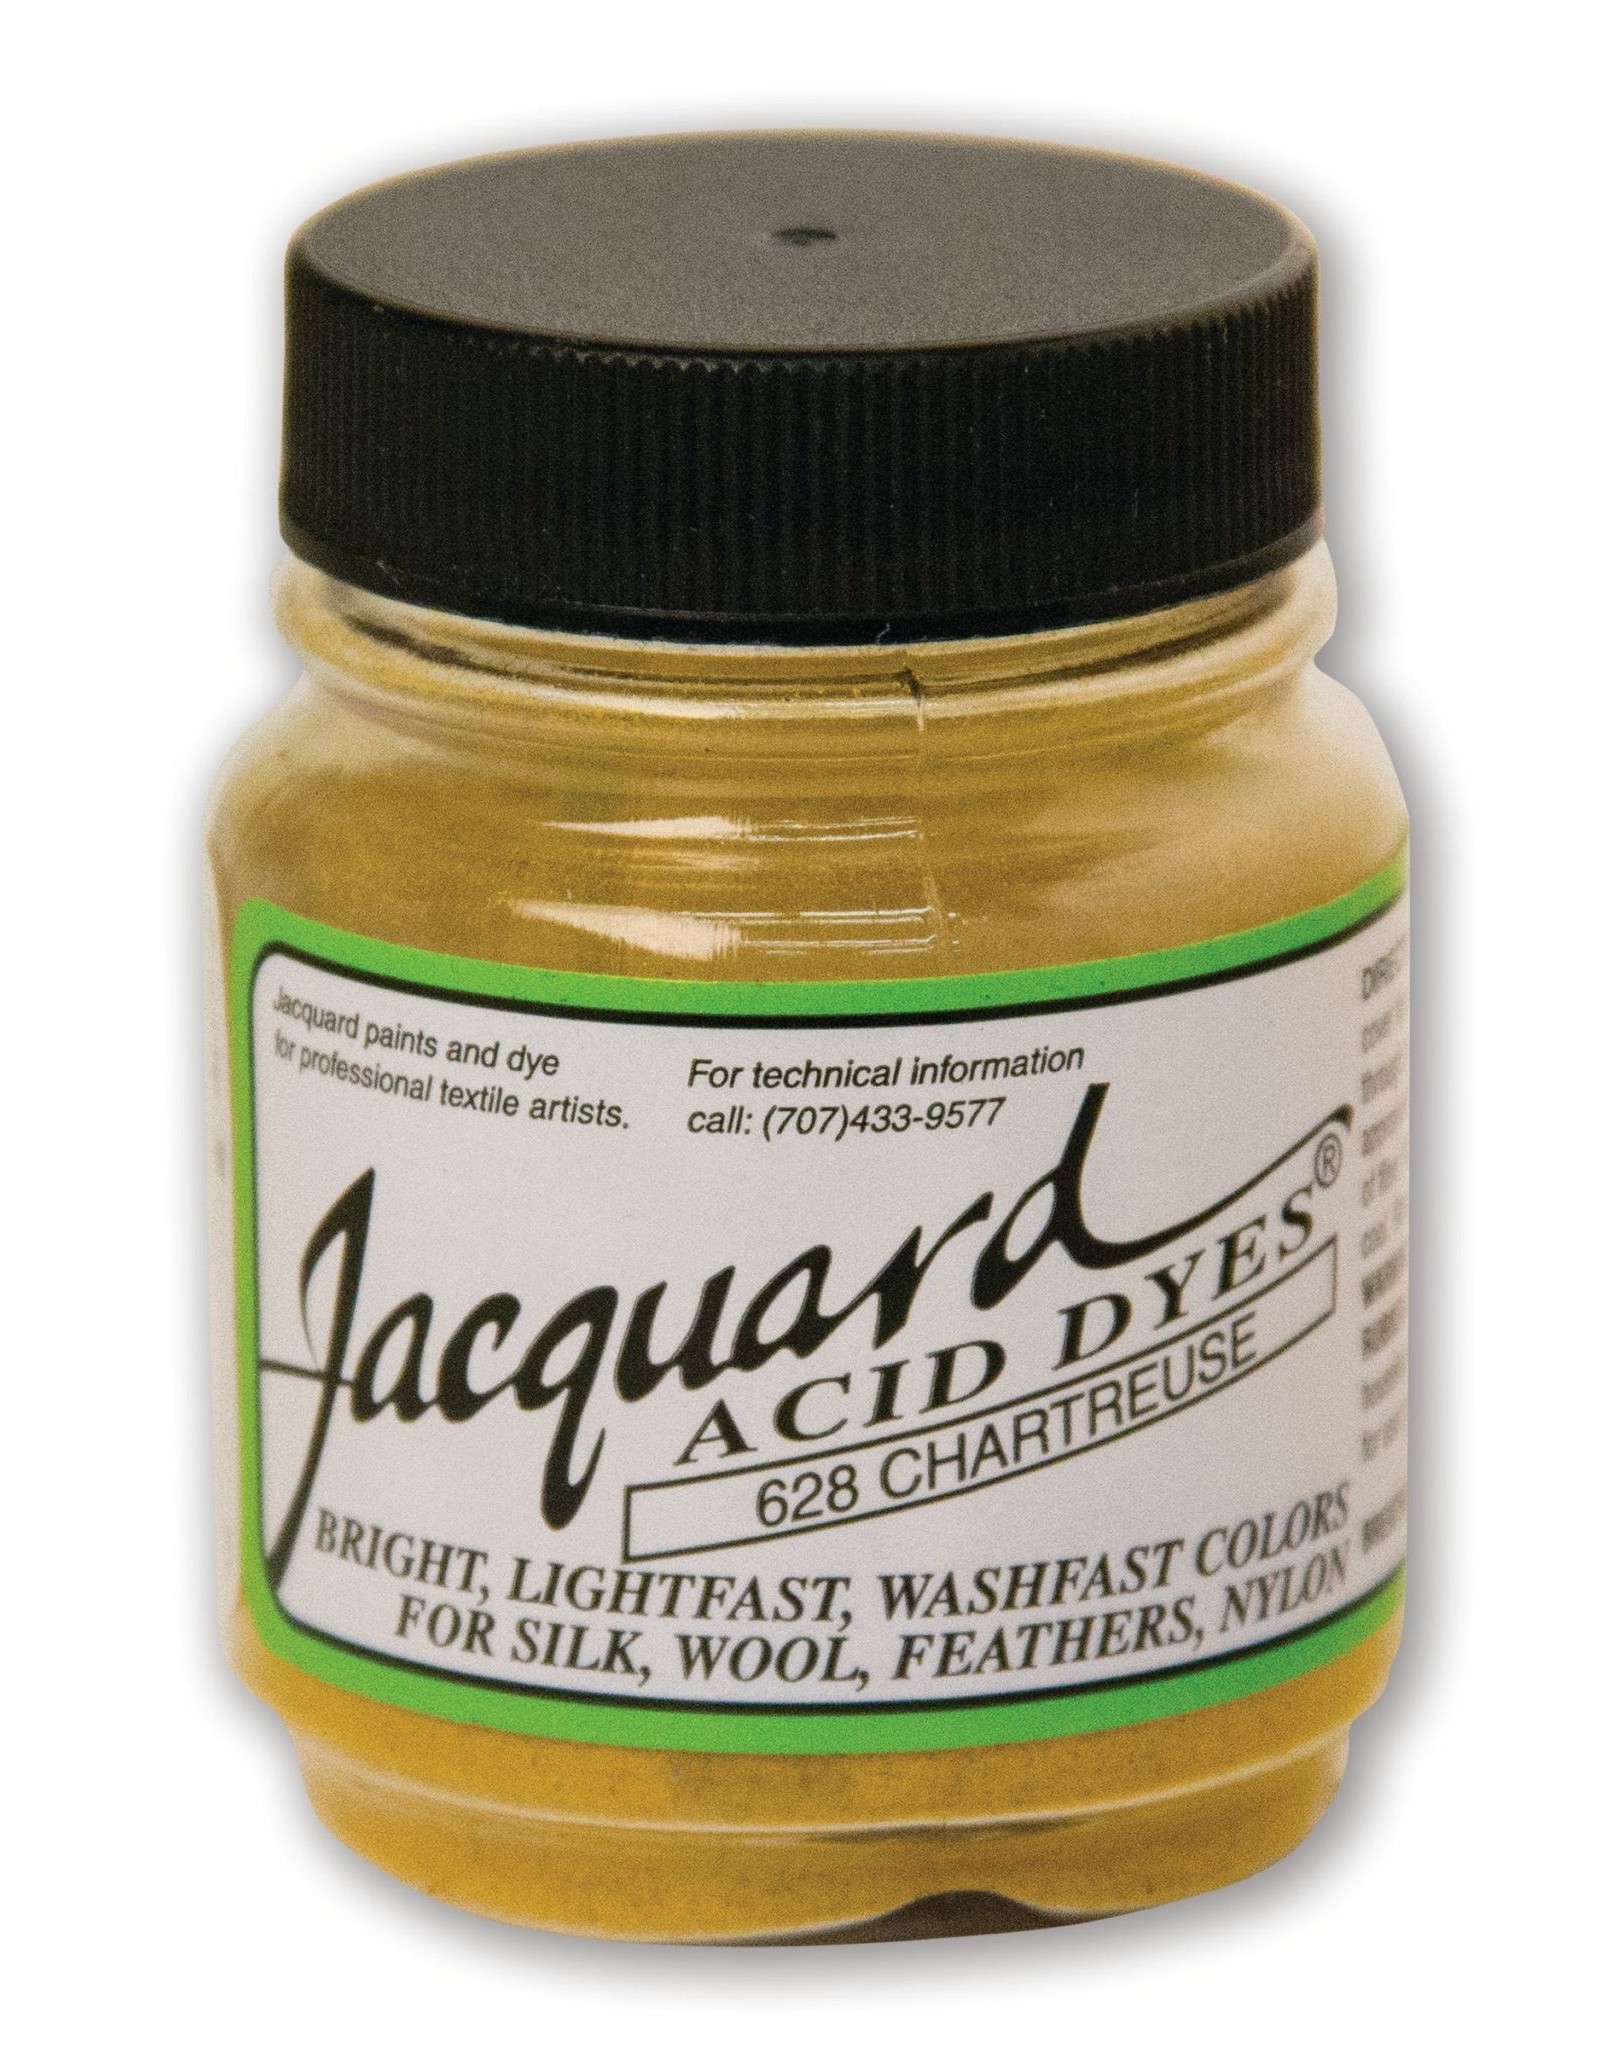 Jacquard Acid Dye #628 Chartreuse 1/2oz - The Art Store/Commercial Art  Supply